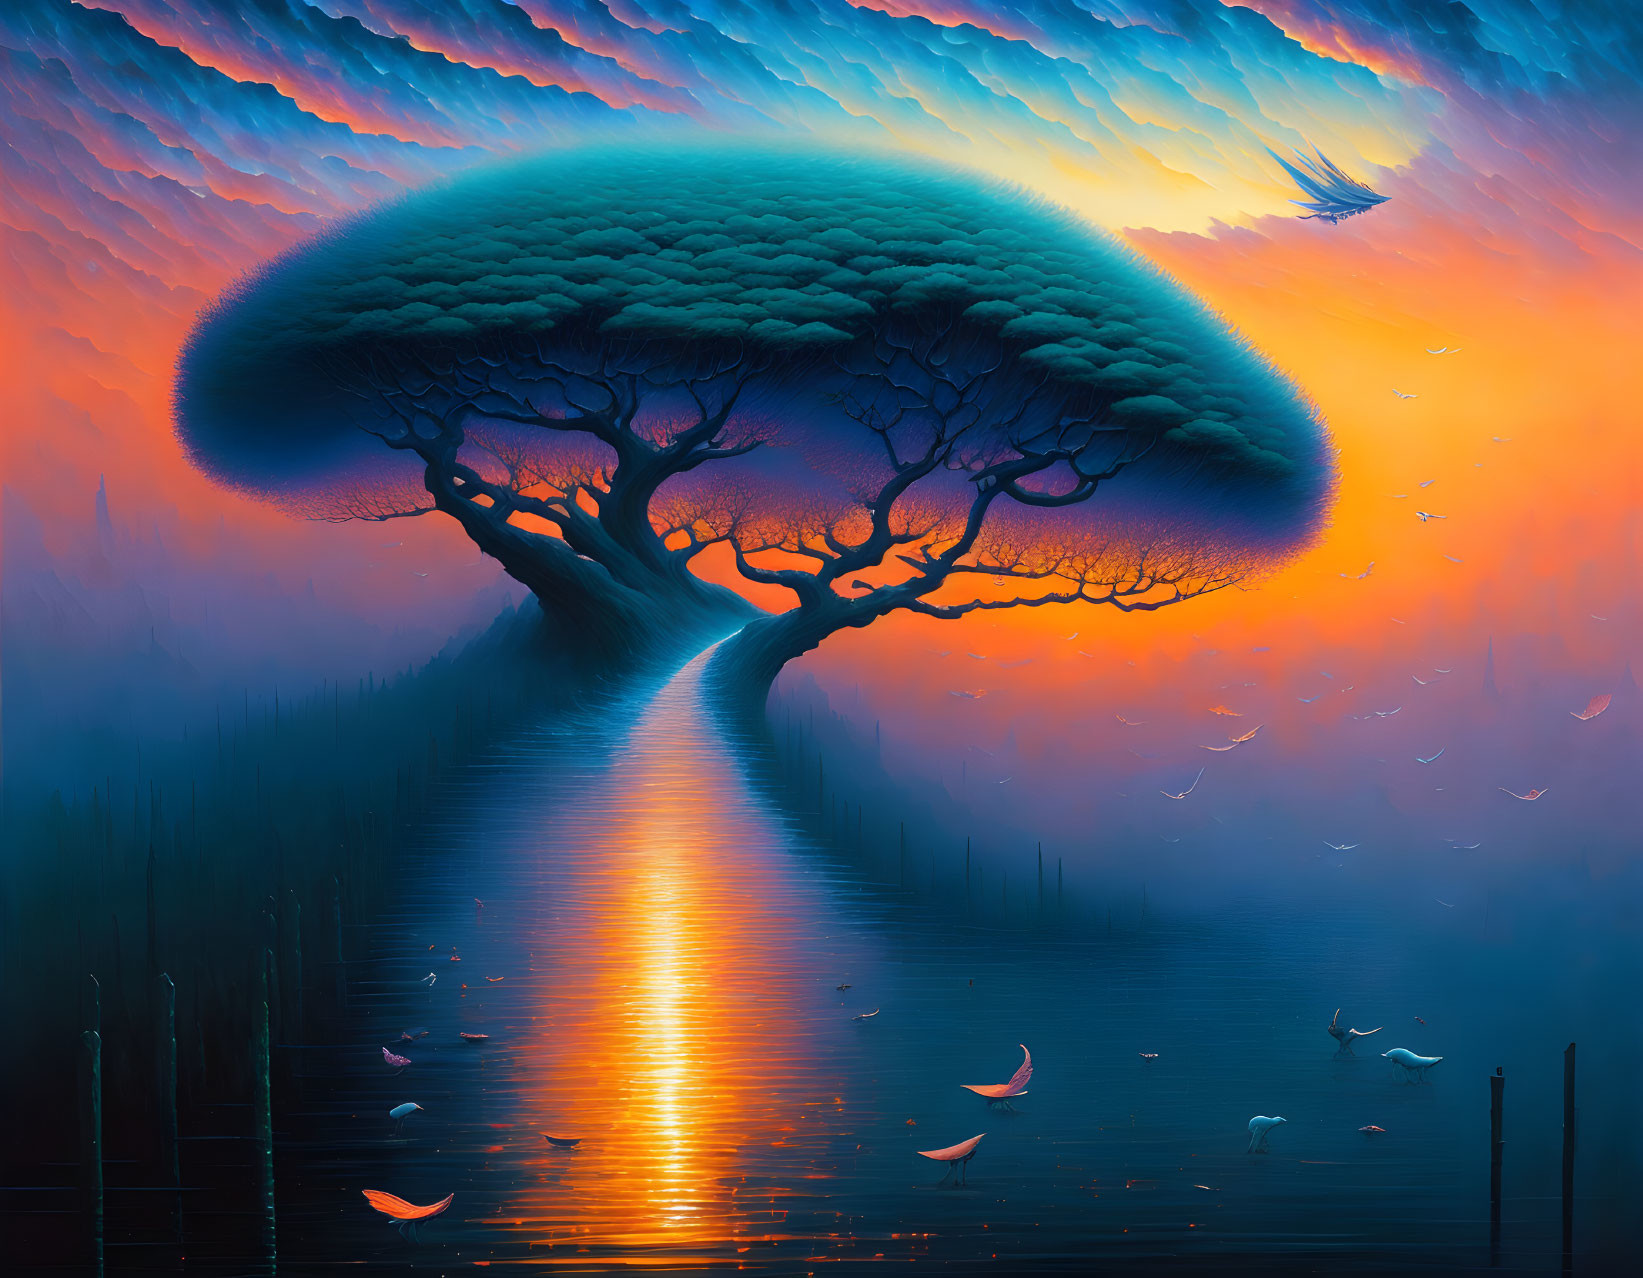 Illustrated tree with cloud-like canopy over reflective water path, birds, blue to orange sky